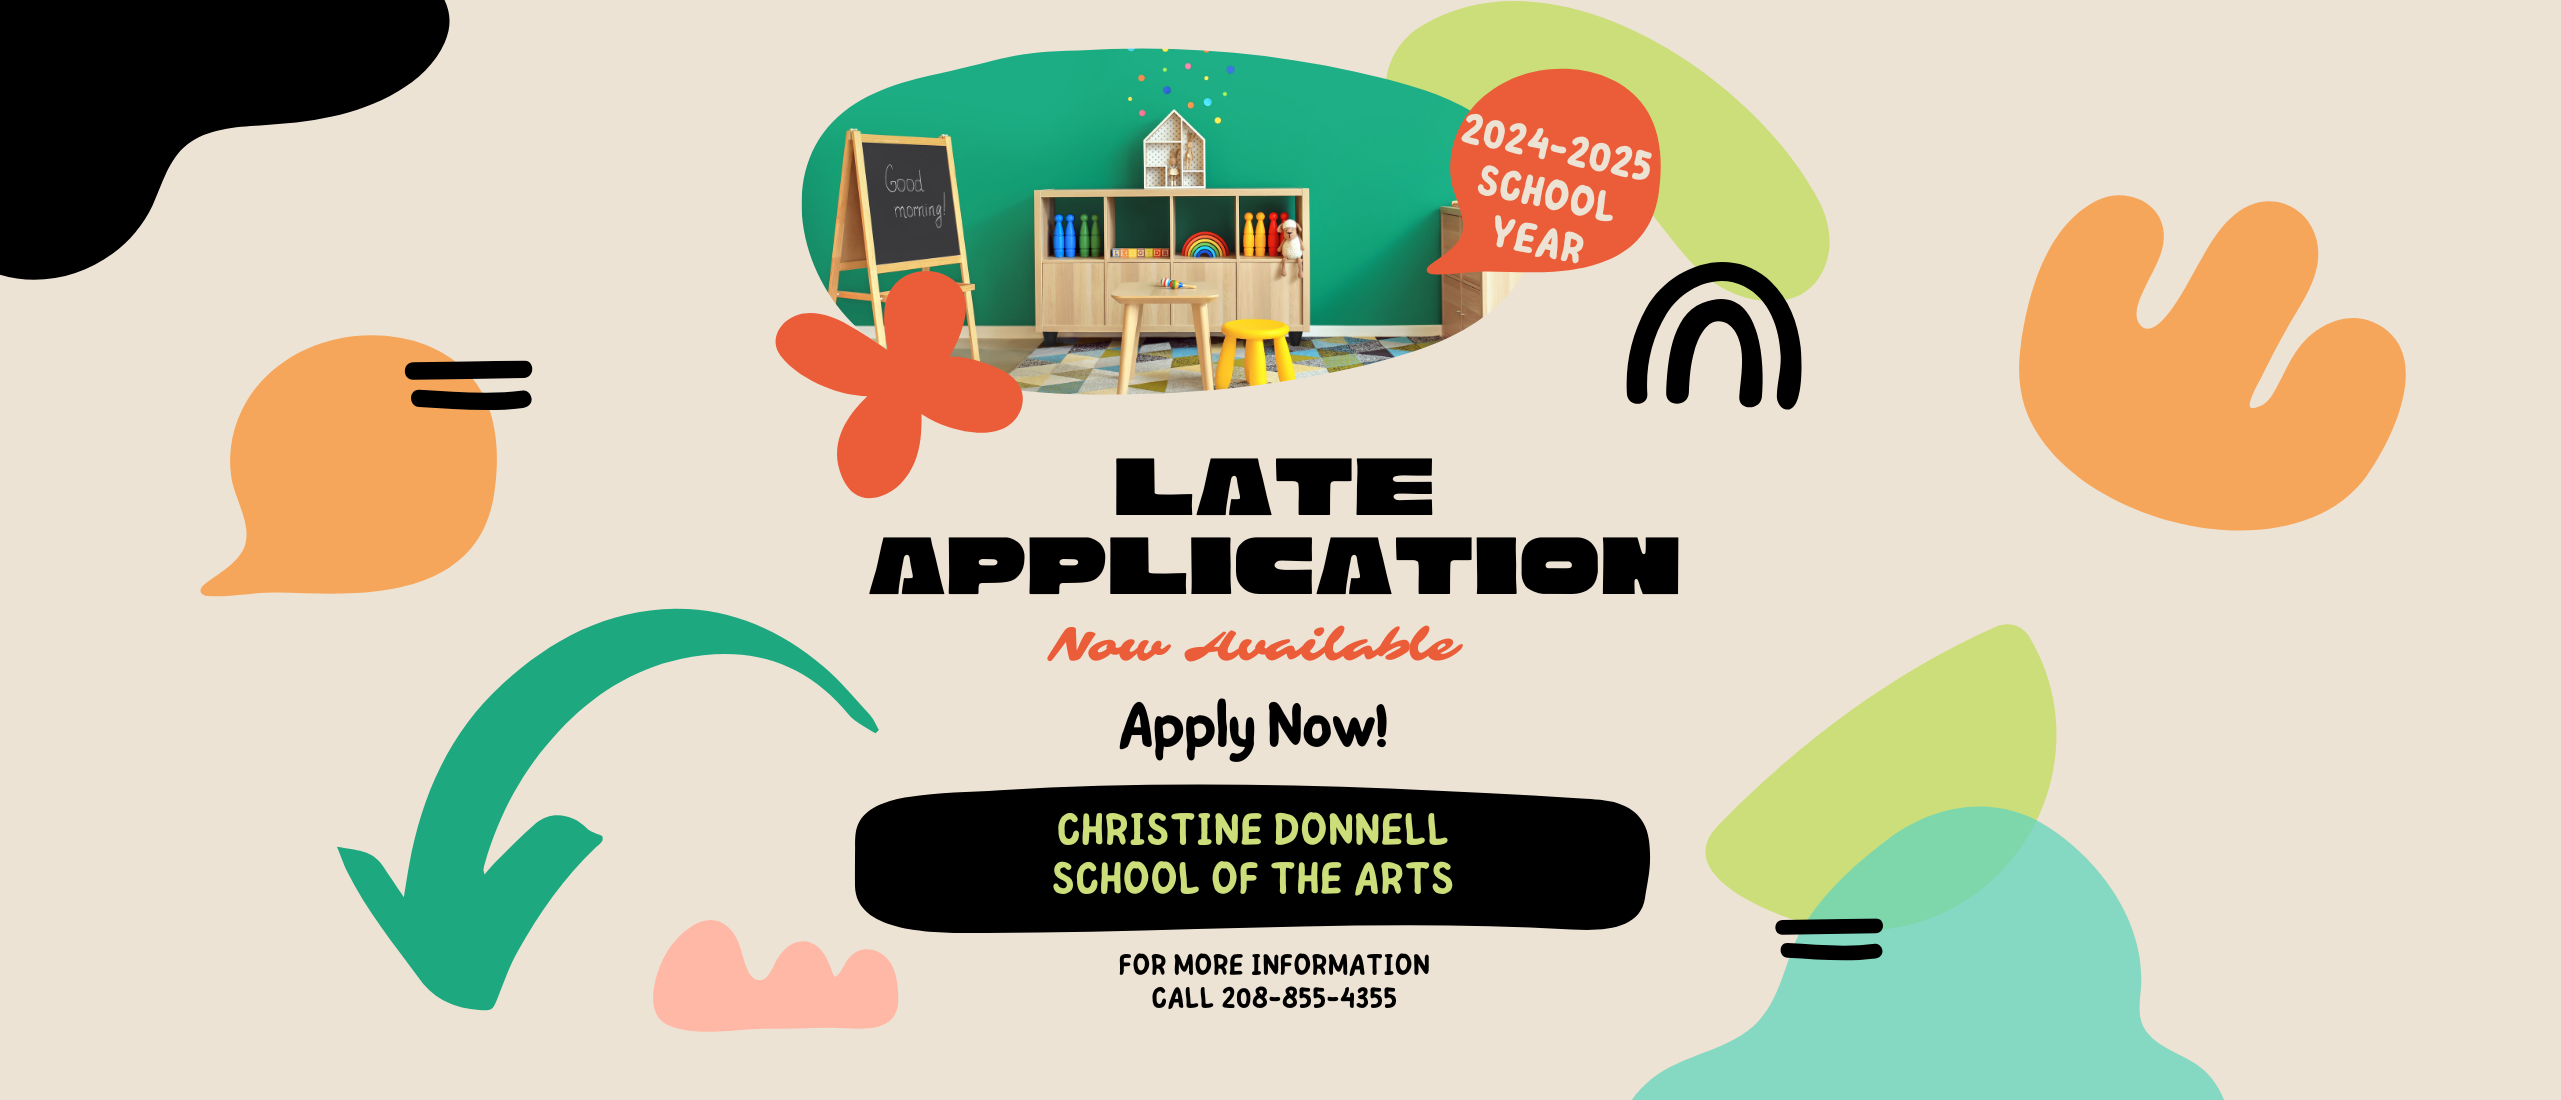 Late Application Now Available